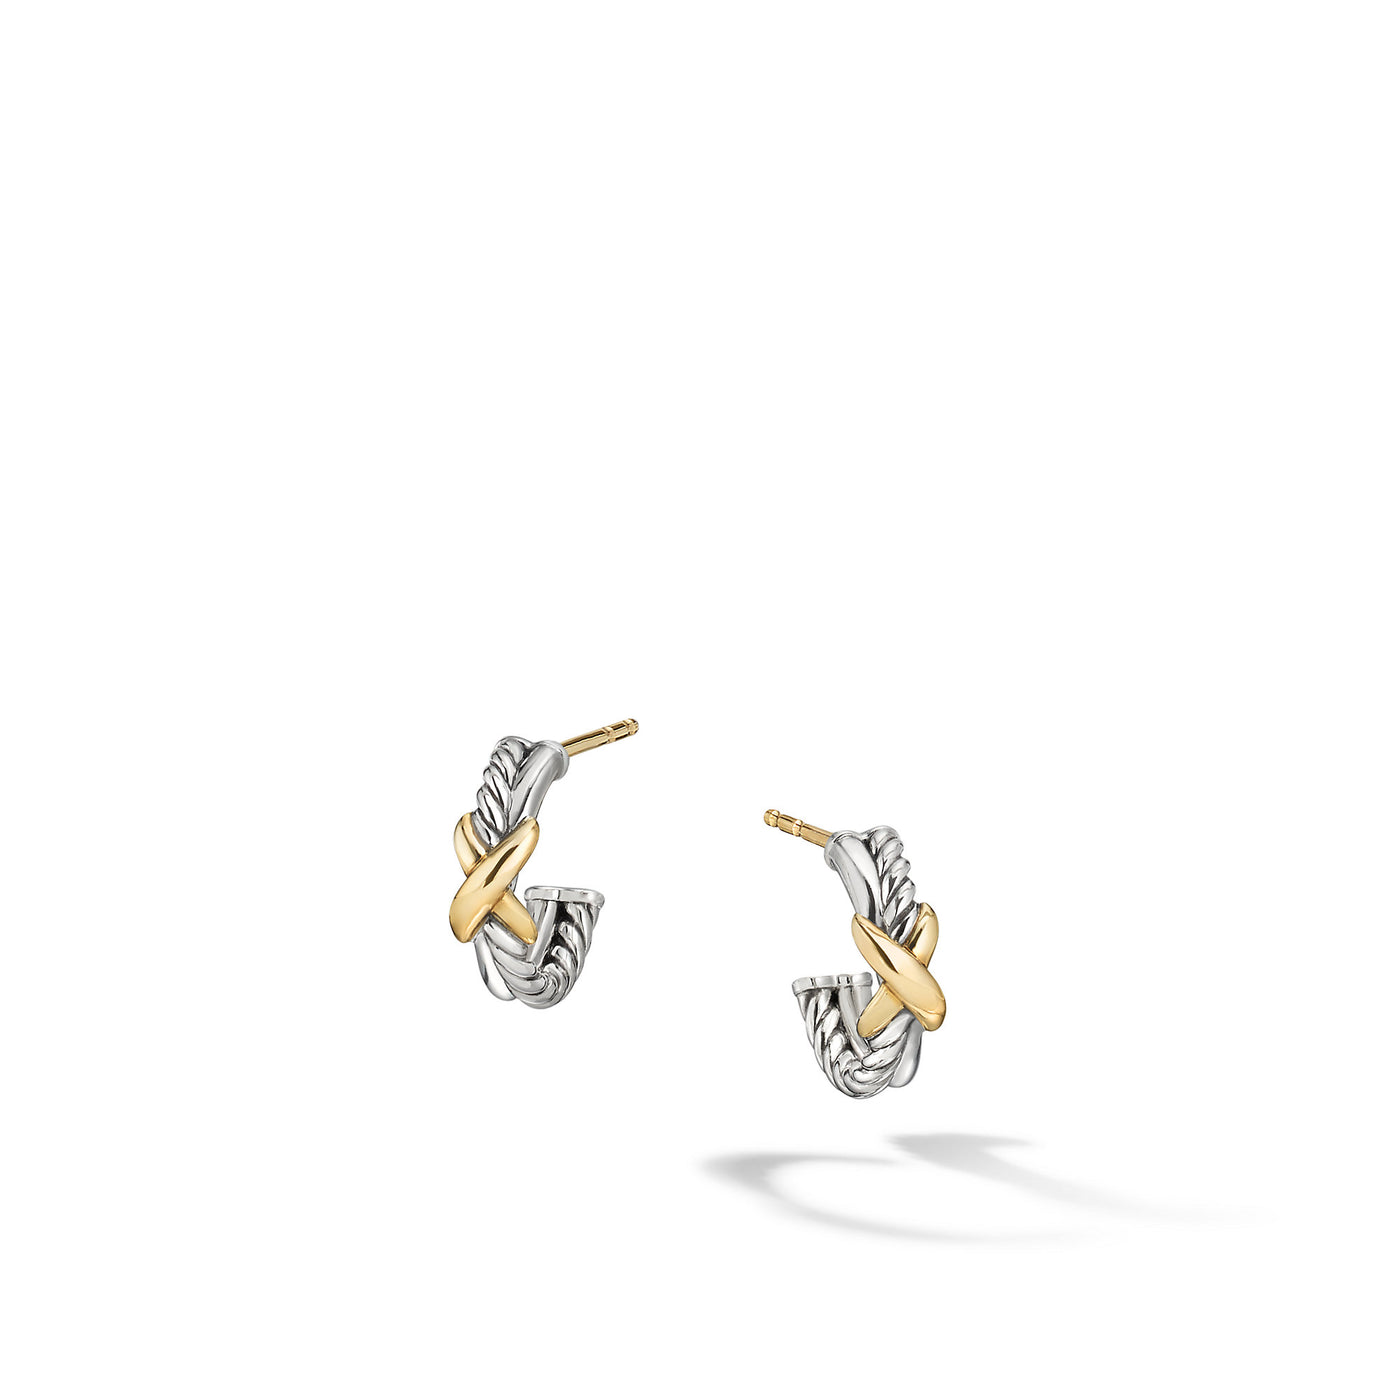 Petite X Hoop Earrings in Sterling Silver with 18K Yellow Gold\, 12.6mm